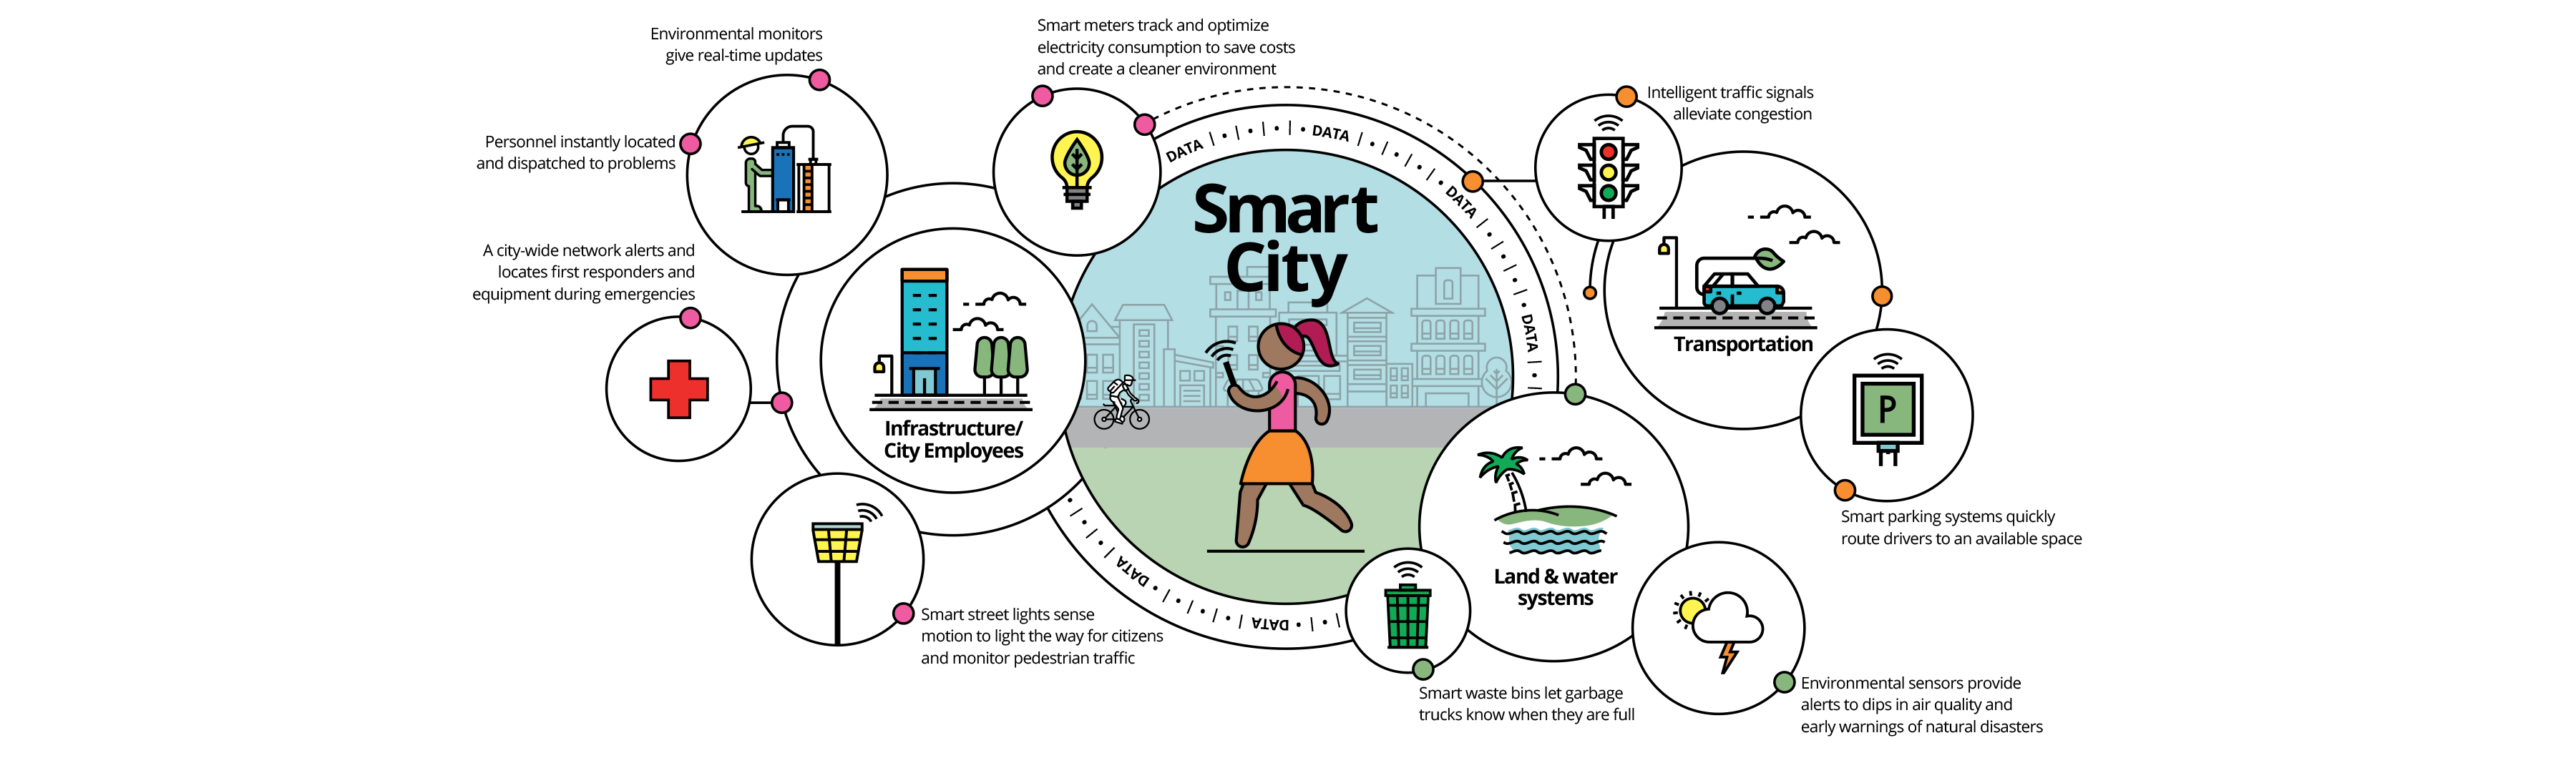 The components of a smart city